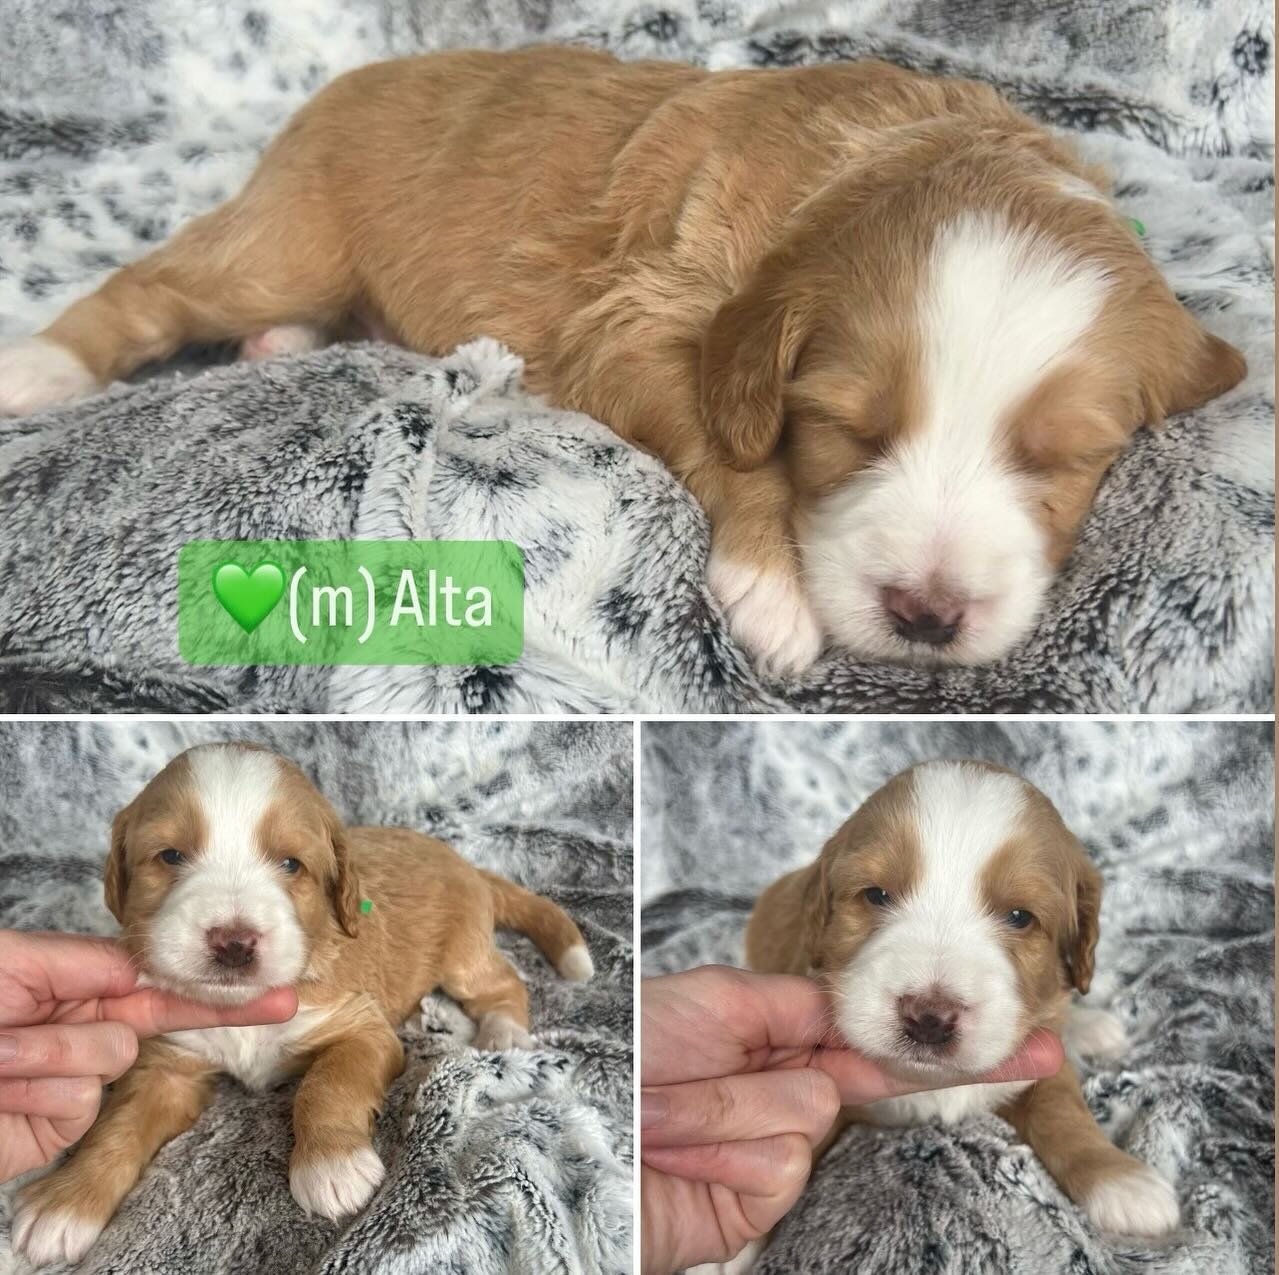 Maggie&rsquo;s 3 week old #bernedoodle babes are doing amazing! The variety of colors in this litter is so fun! Which color is your favorite? 🤩 
#bernedoodlepuppy #redandwhitetuxedobernedoodle #merlebernedoodle #tricolorbernedoodle #doodledailyposts